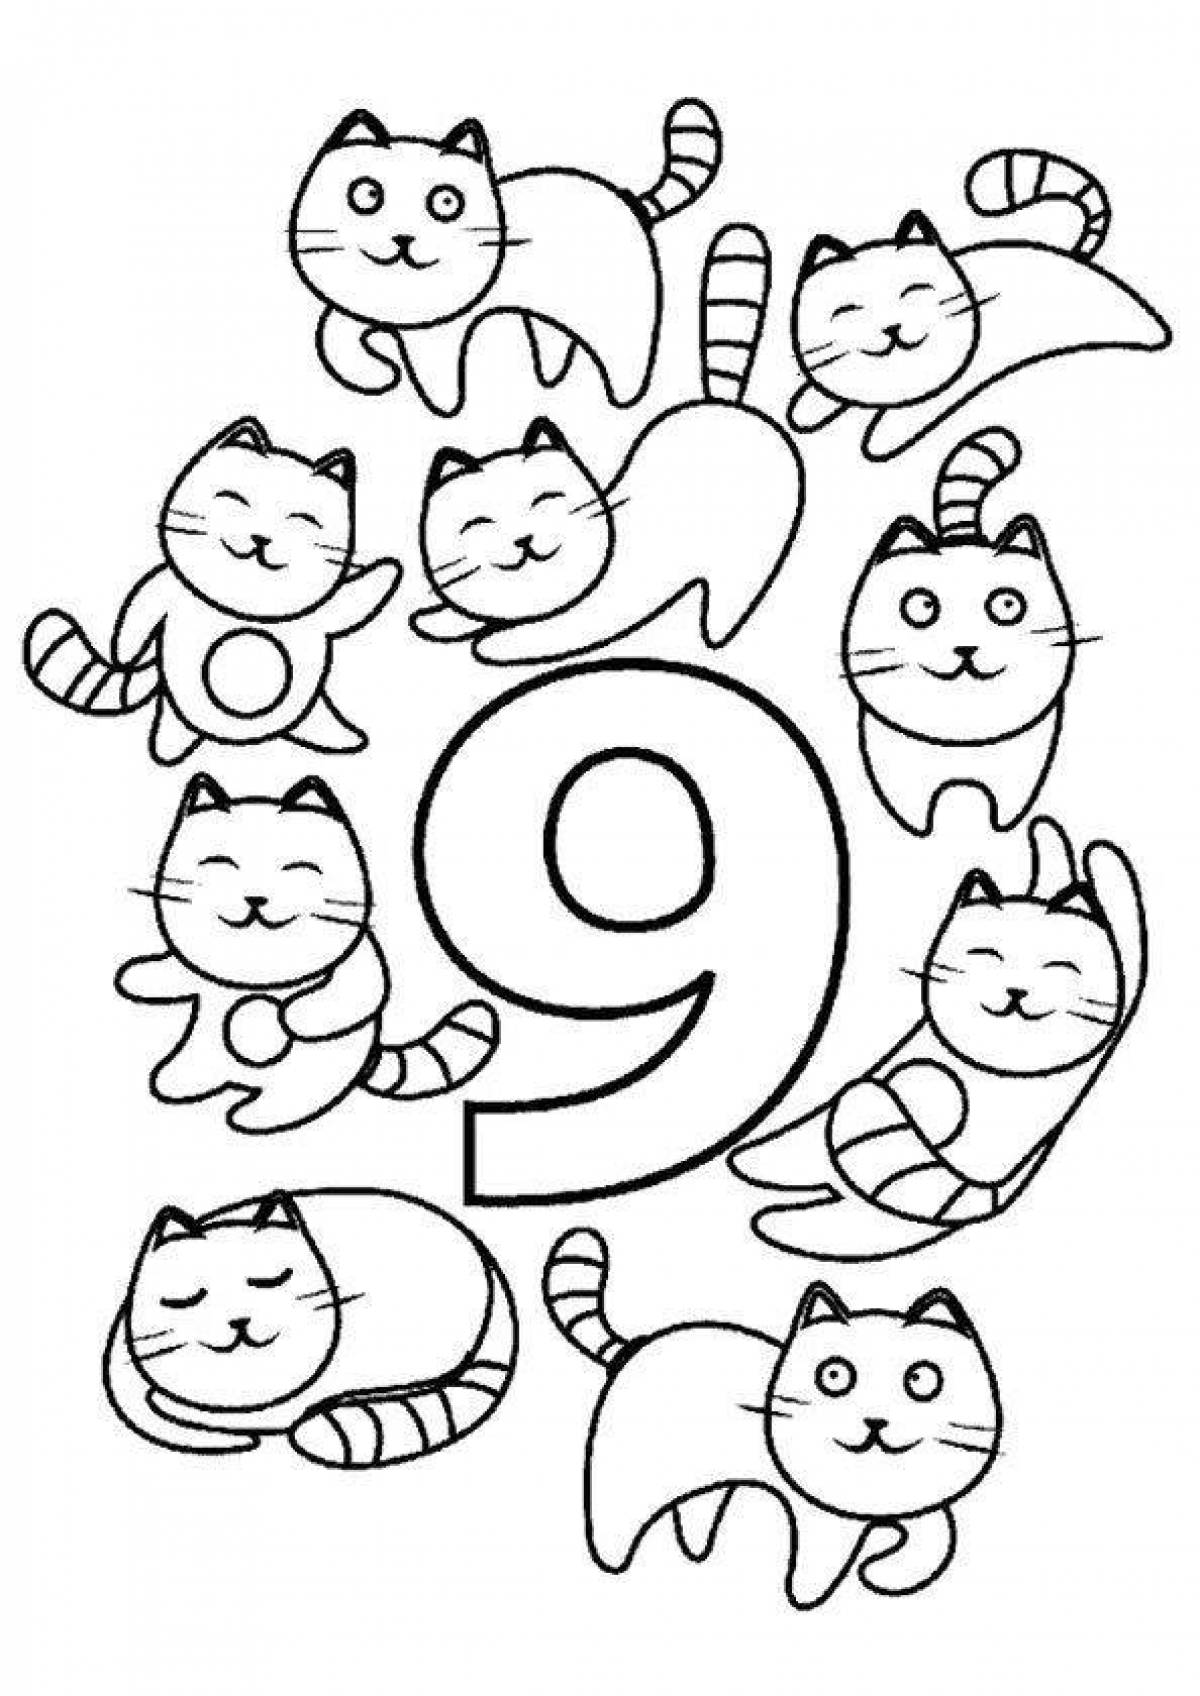 Intriguing coloring page 9